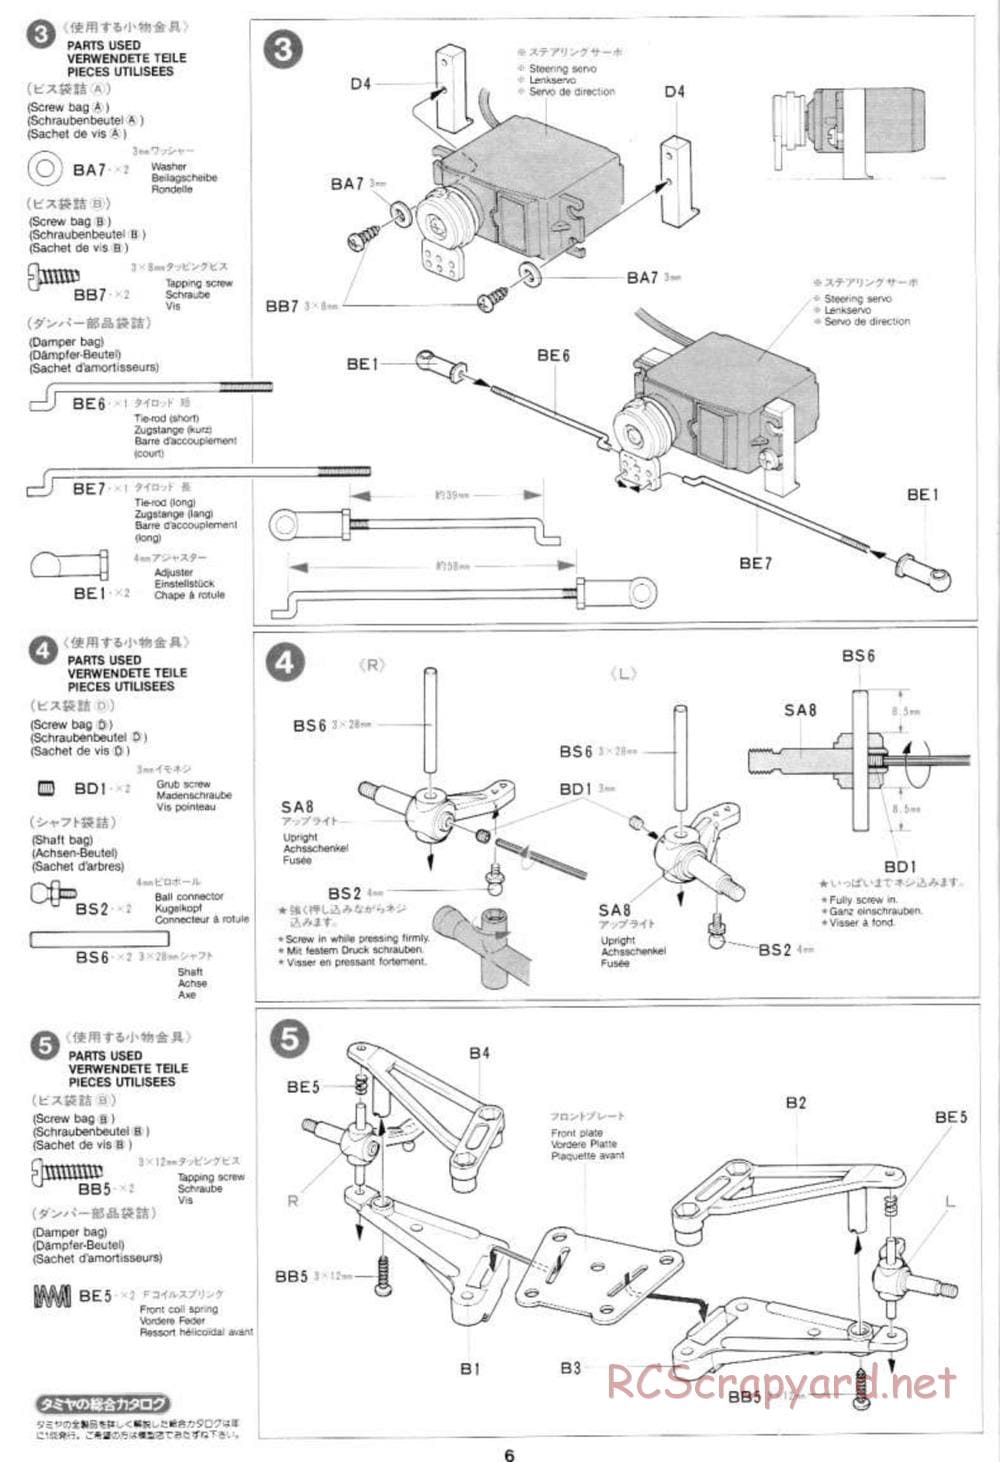 Tamiya - Mercedes-Benz C11 - Group-C Chassis - Manual - Page 6